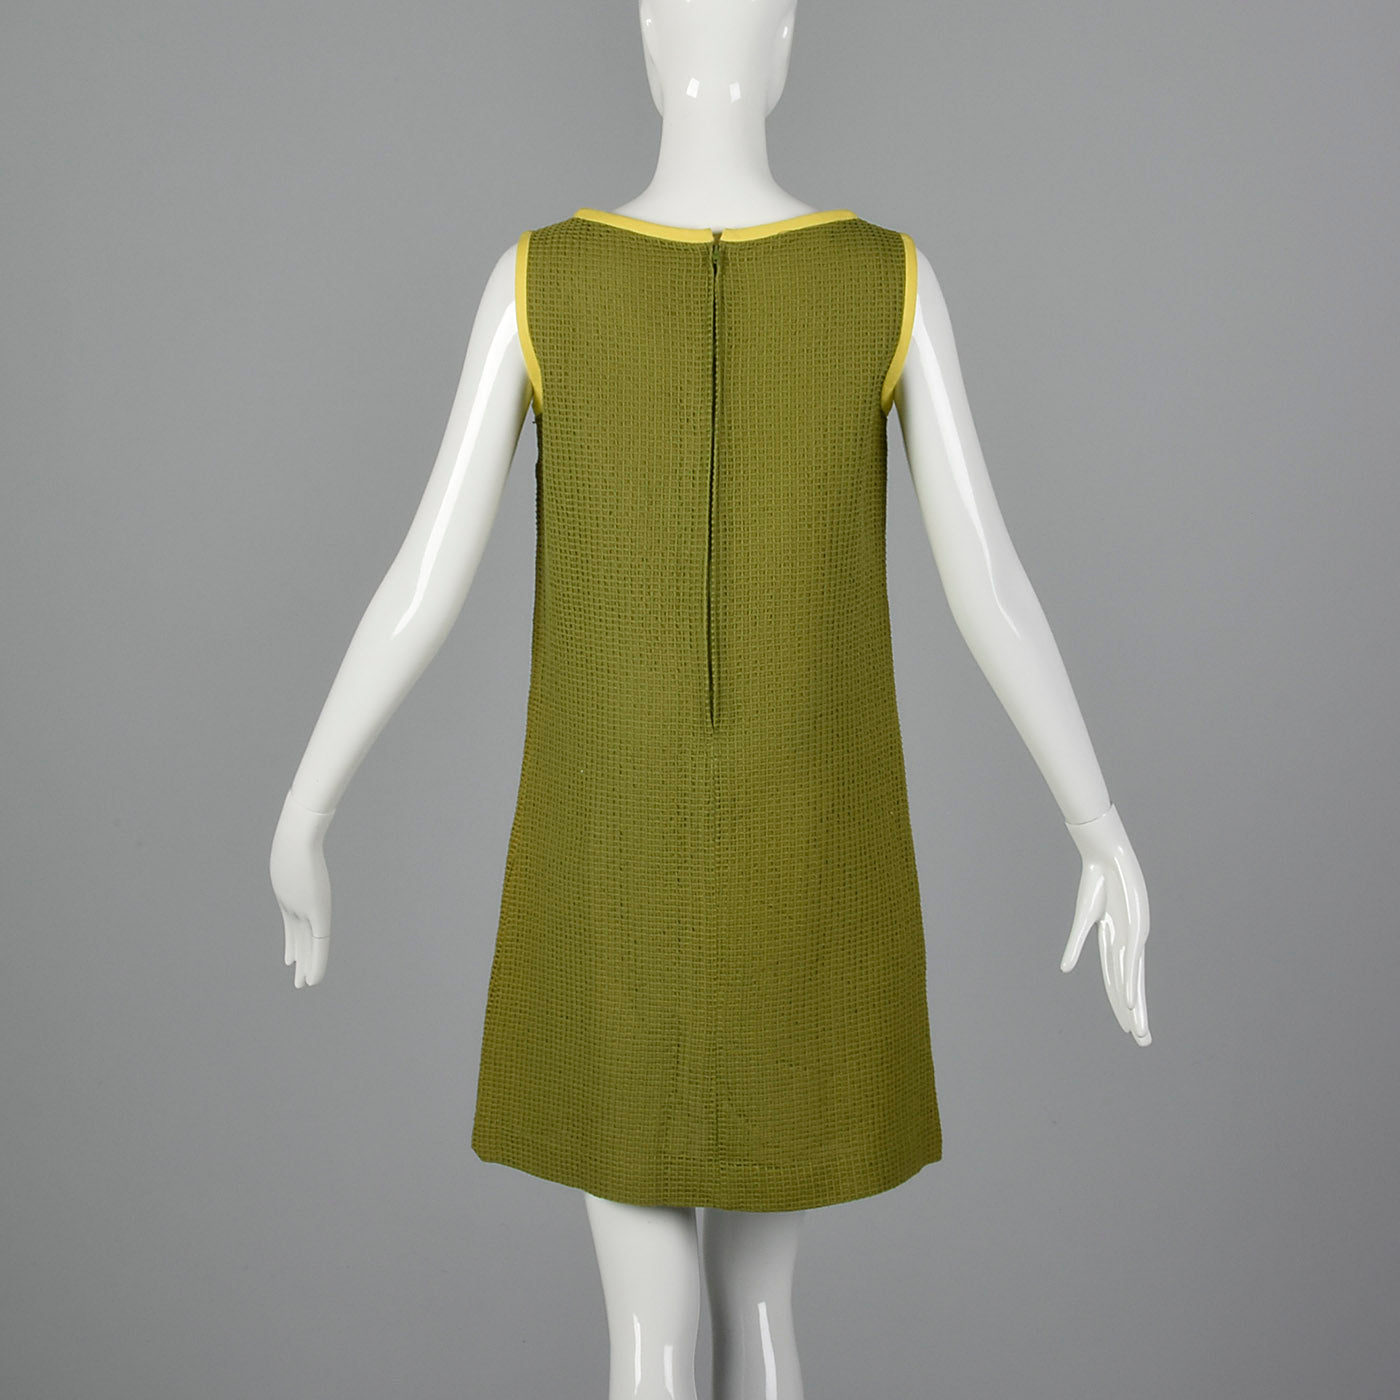 1960s Deadstock Shift Dress with Mesh-Style Overlay